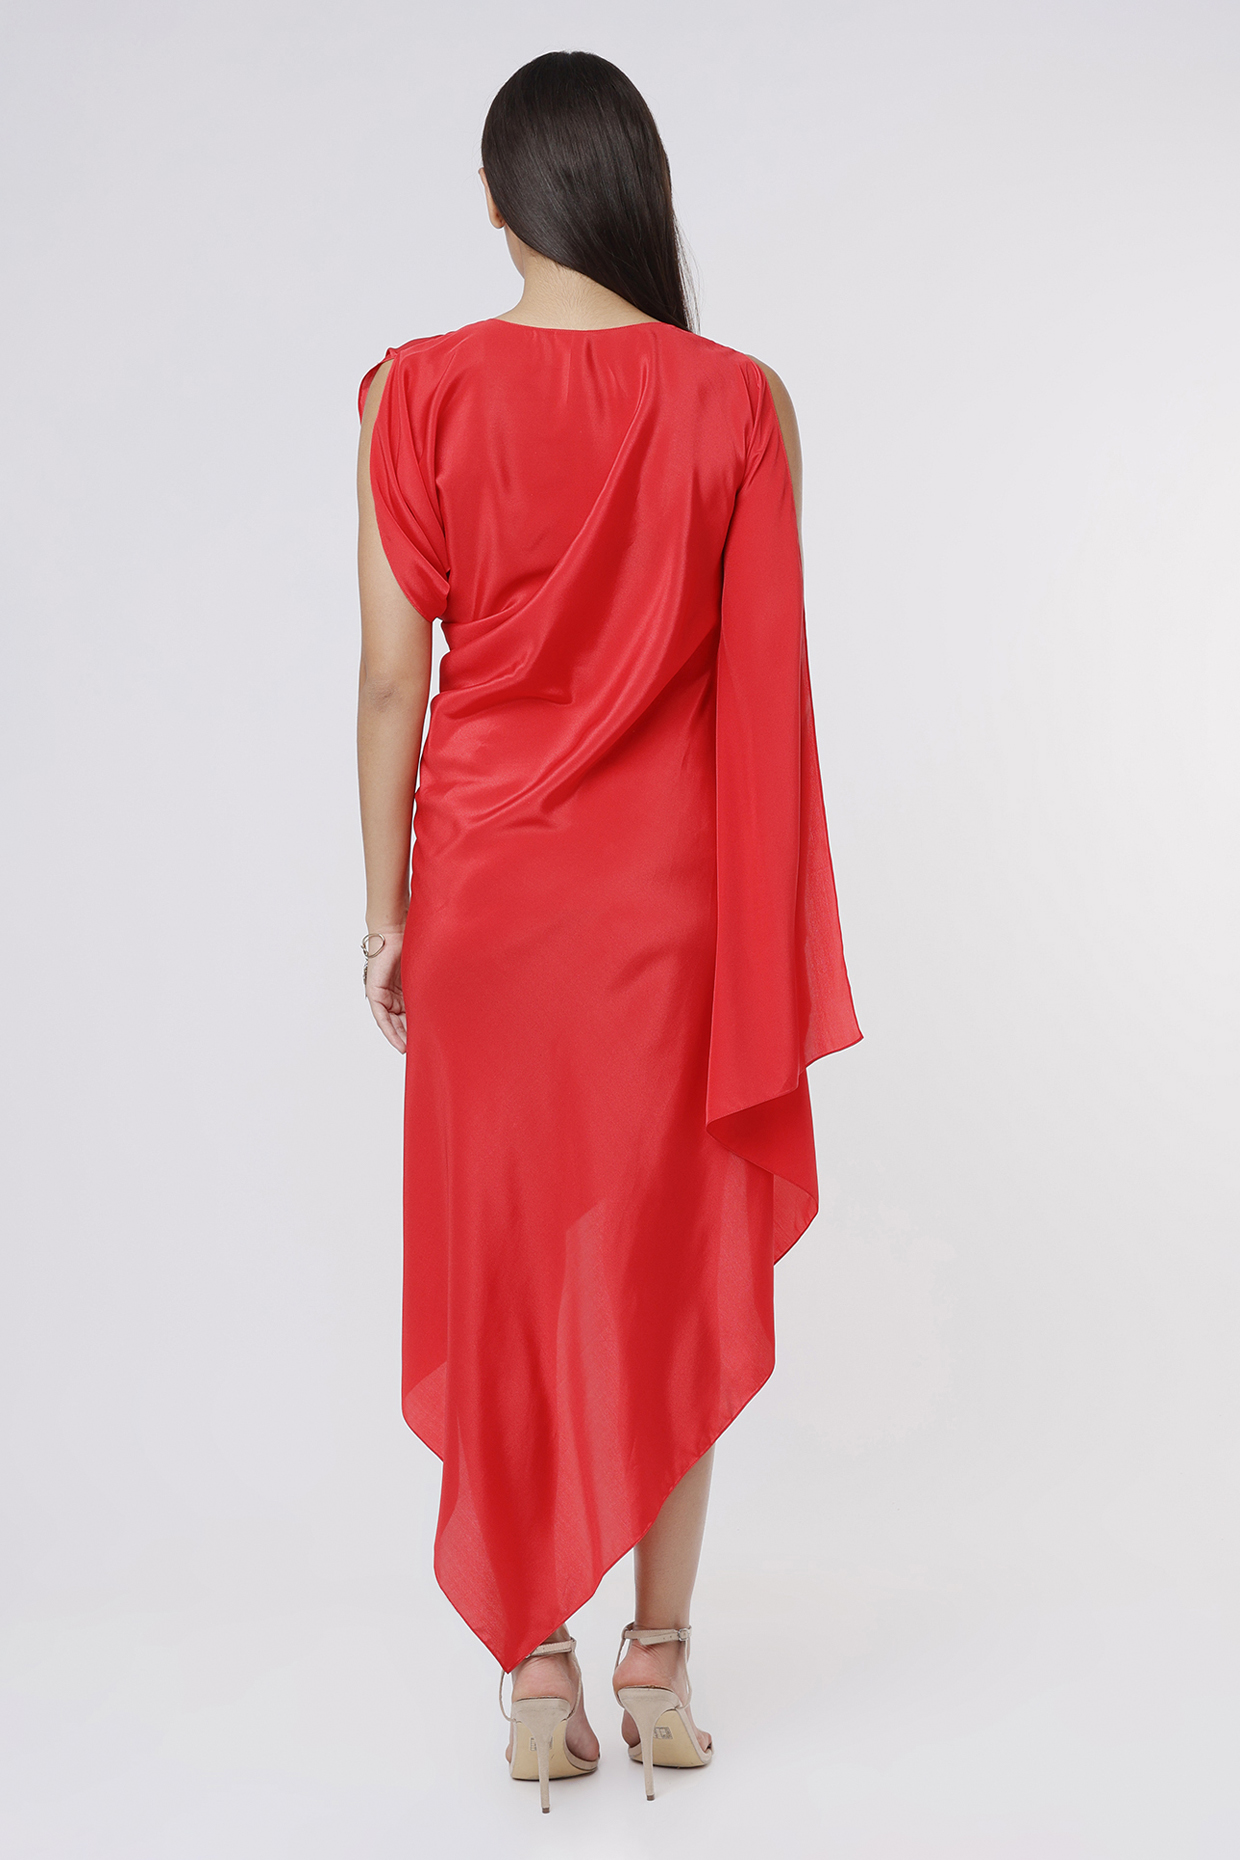 Red Draped Dress With Contrasting Strap